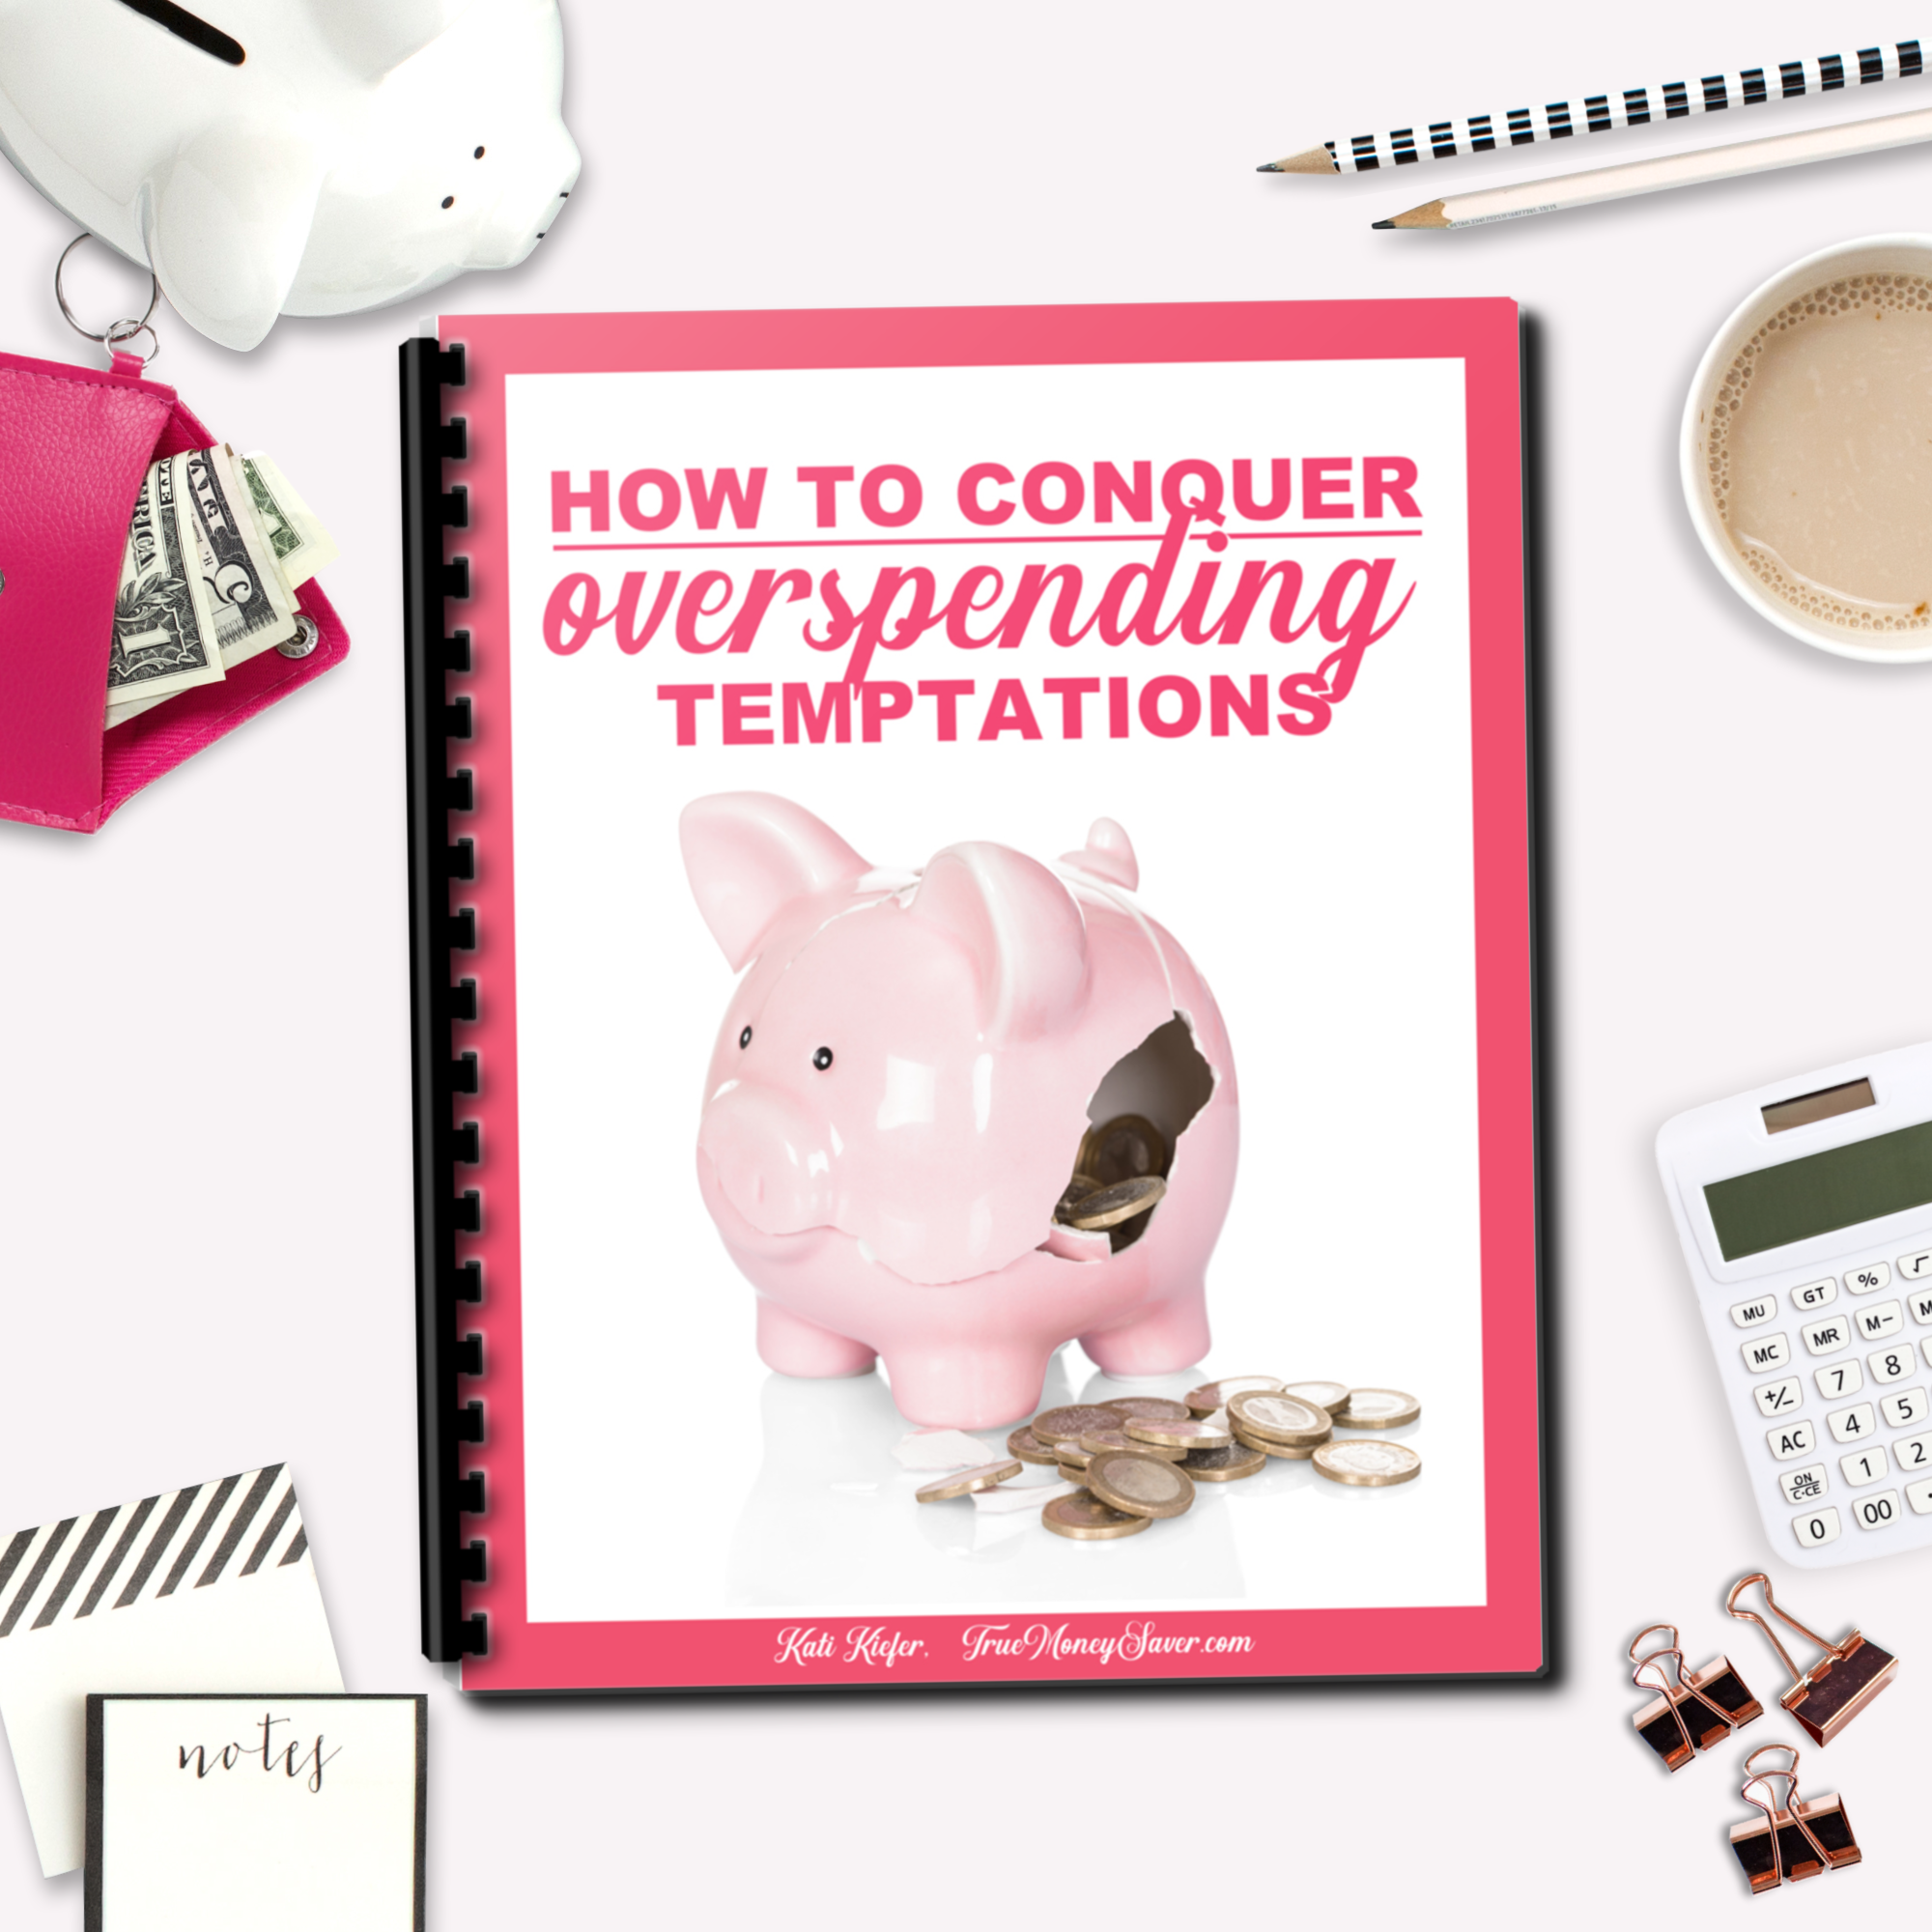 How To Conquer Overspending Temptations